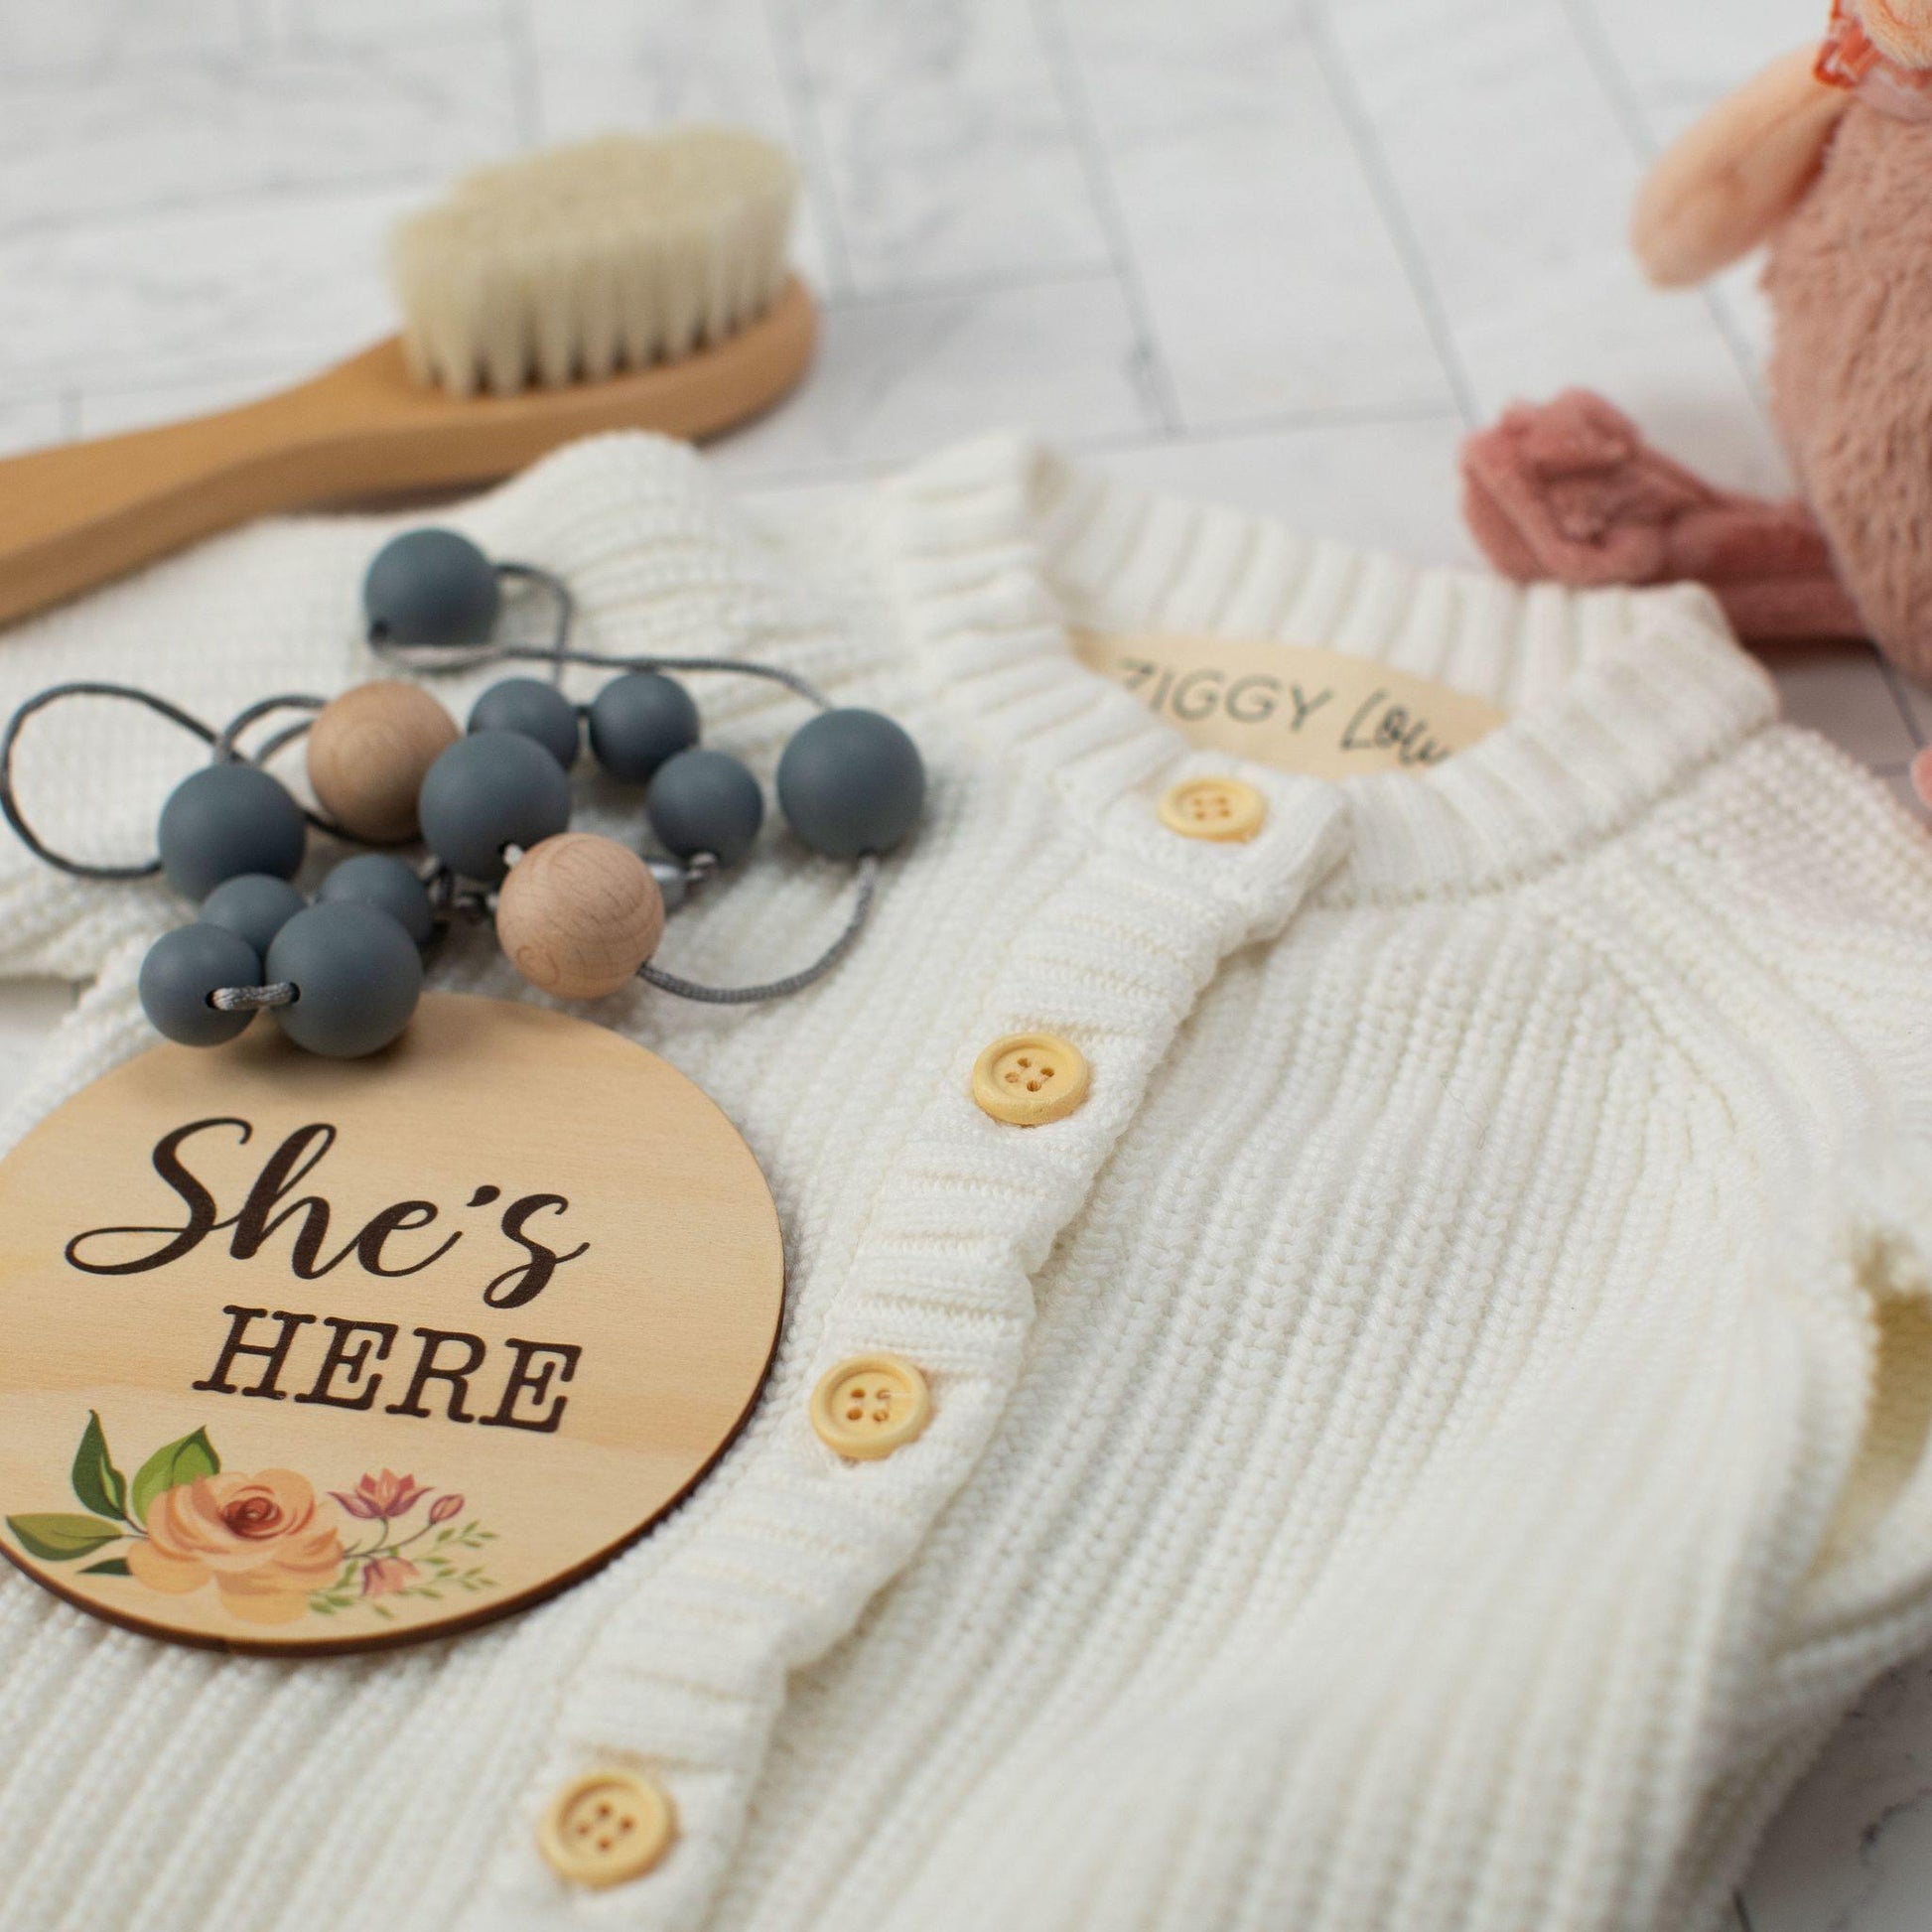 white baby cardigan with "she's here" sign and teething necklace laying on top. Baby hairbrush in the background